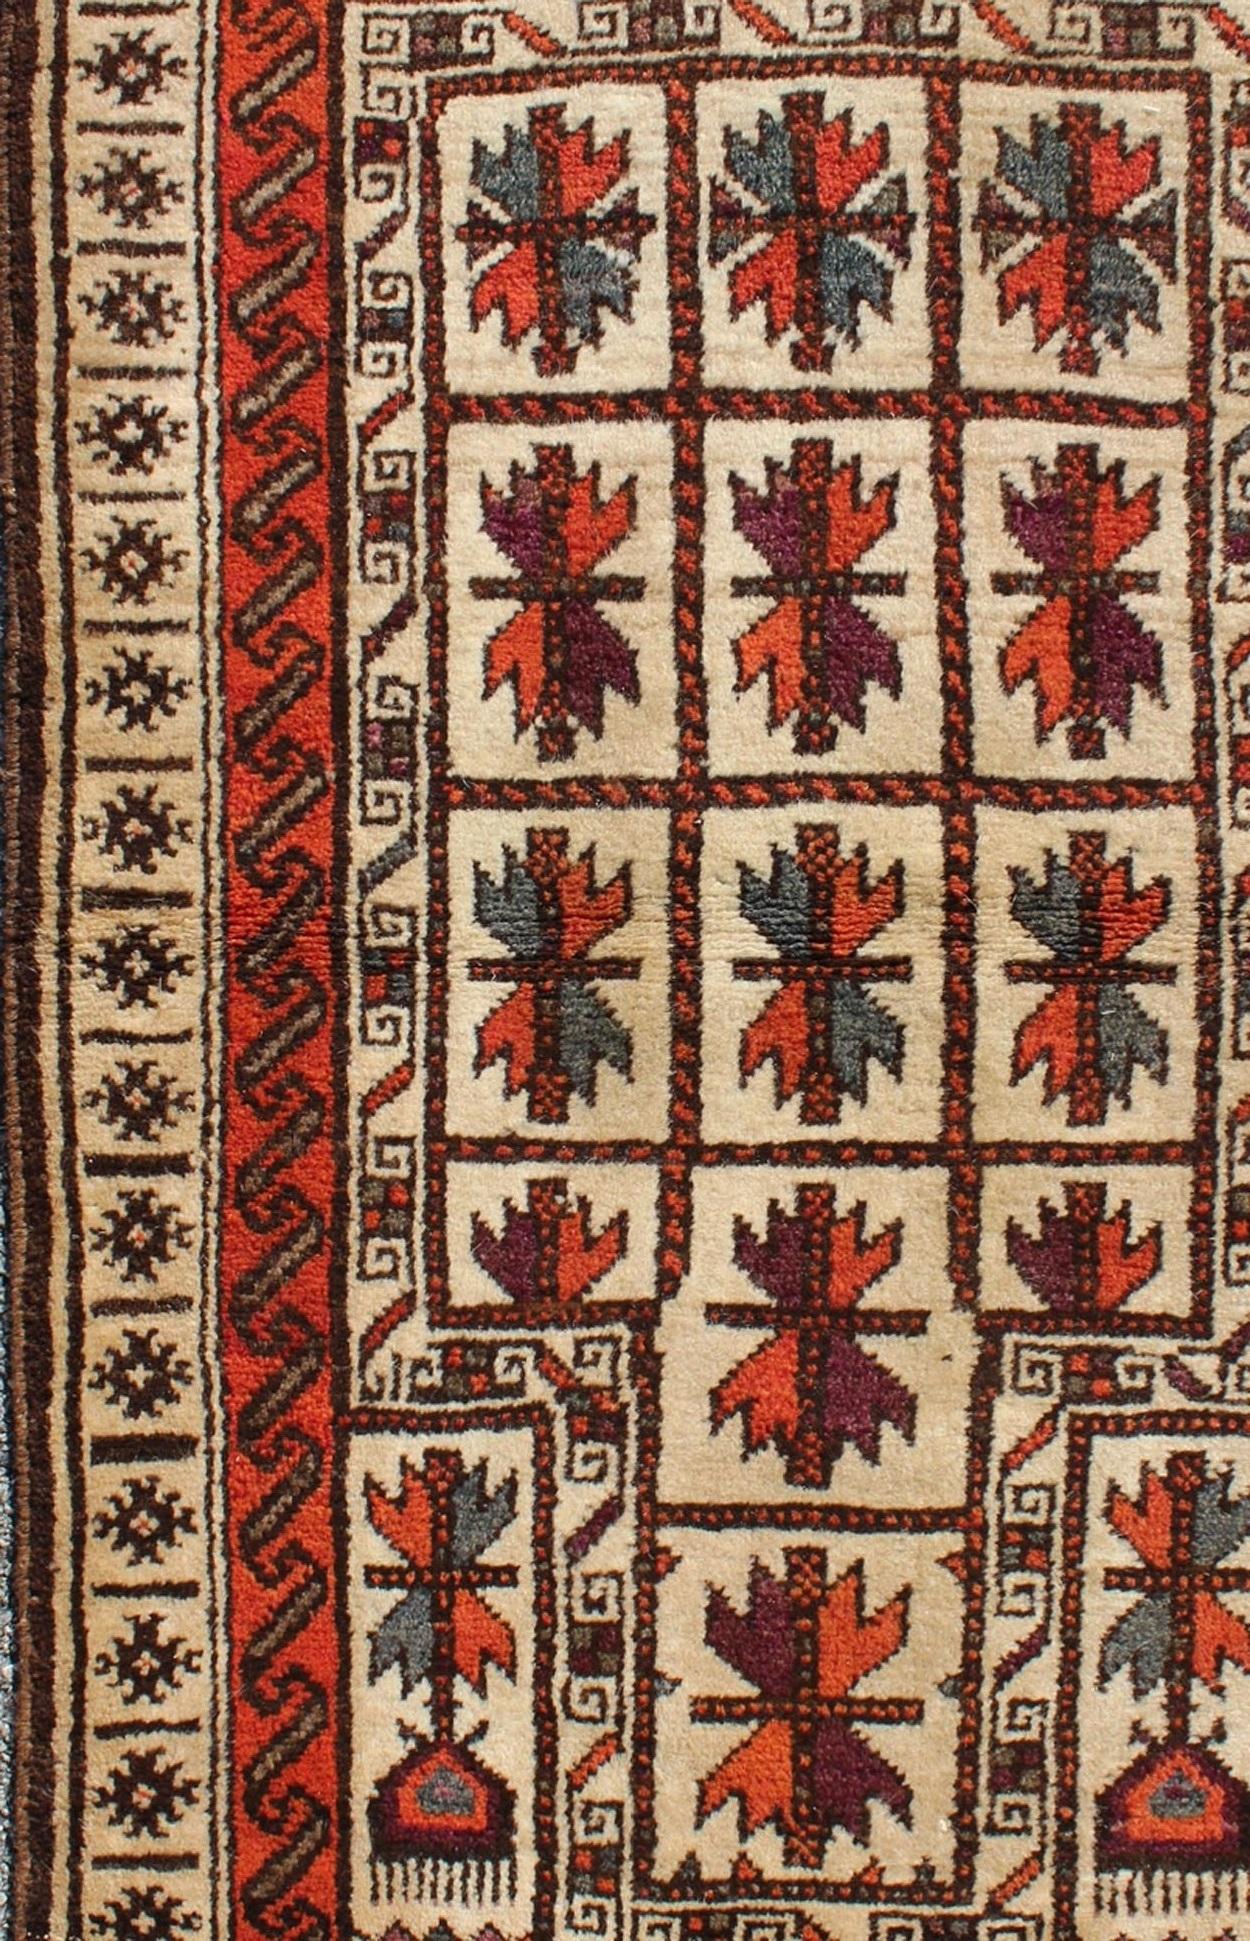 Midcentury vintage Beluch rug with all-over diamond pattern in red and charcoal. Keivan Woven Arts / rug H-1404-04 country of origin / type: Afghanistan / Tribal, circa mid-20th century

This impressive and complex vintage Afghan Beluch rug (circa